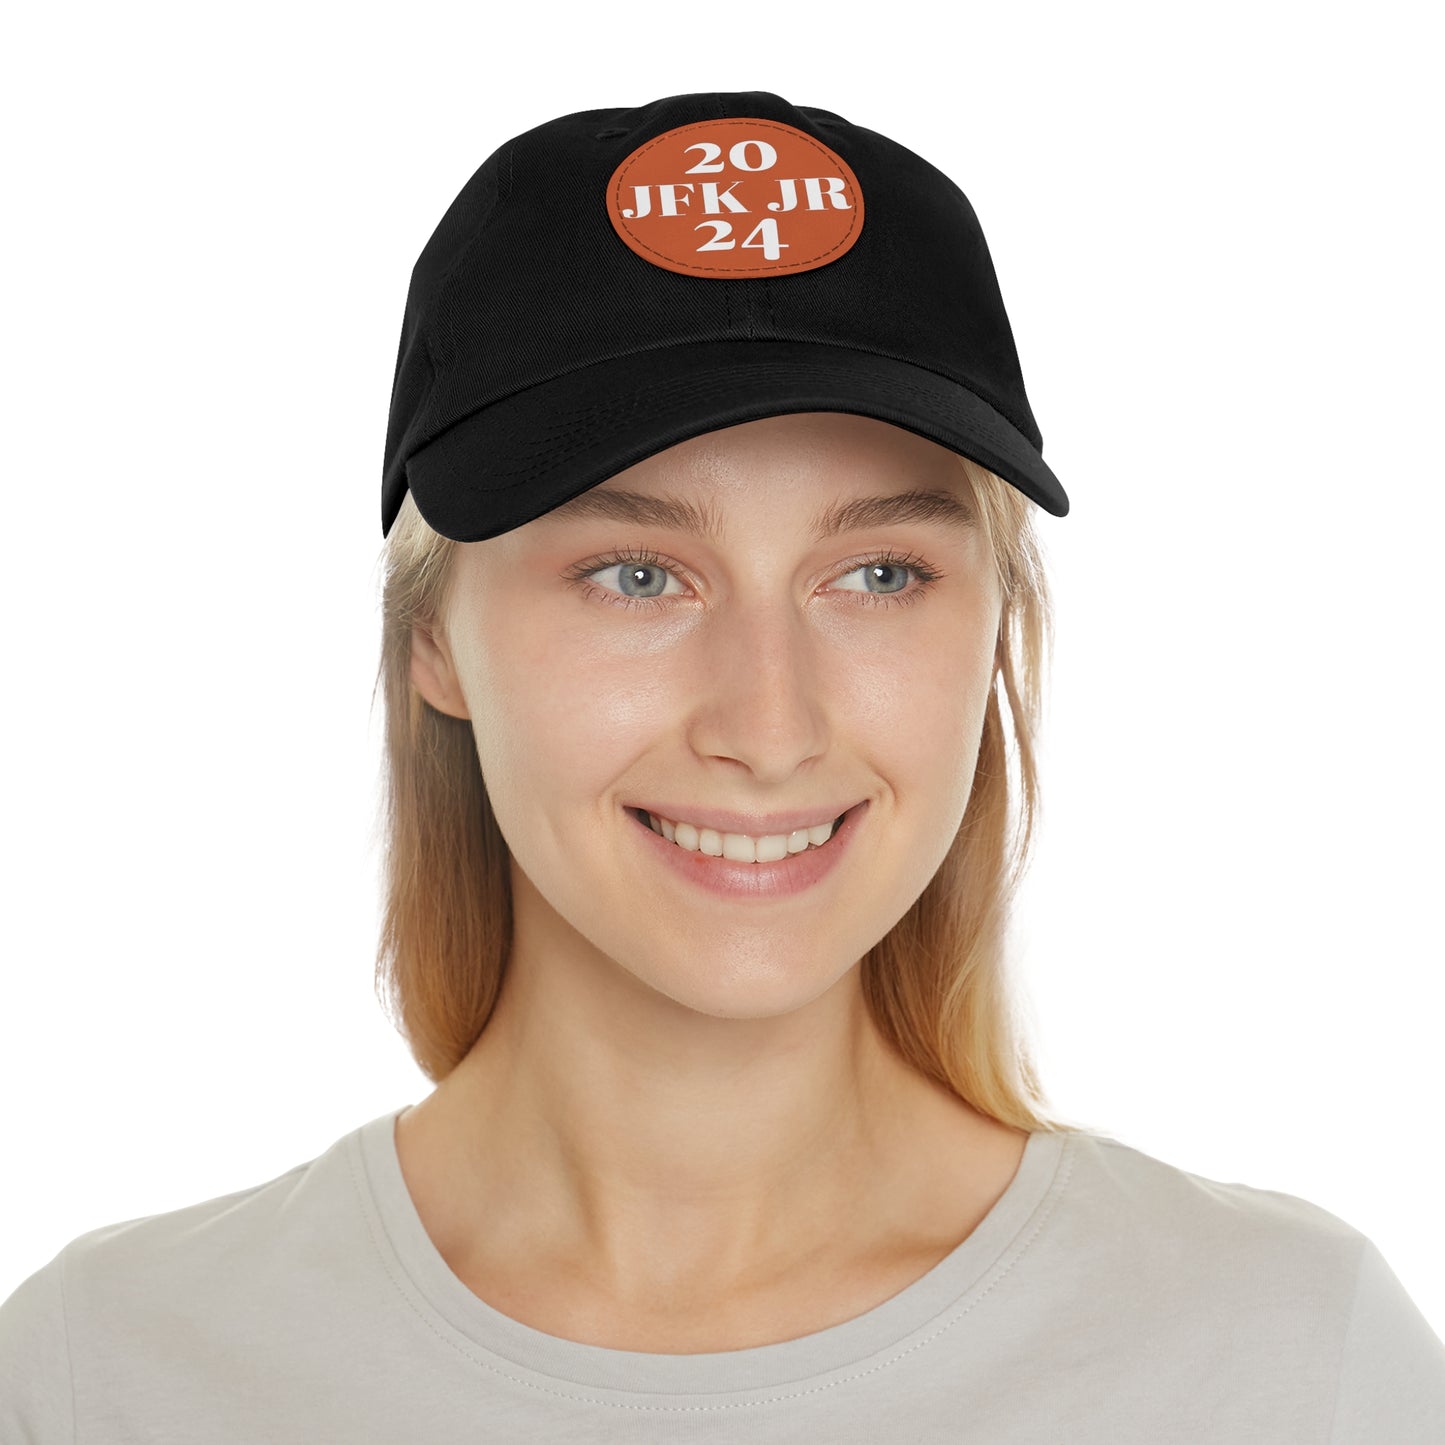 JFK JR 2024 Dad Hat with Leather Patch (Round)